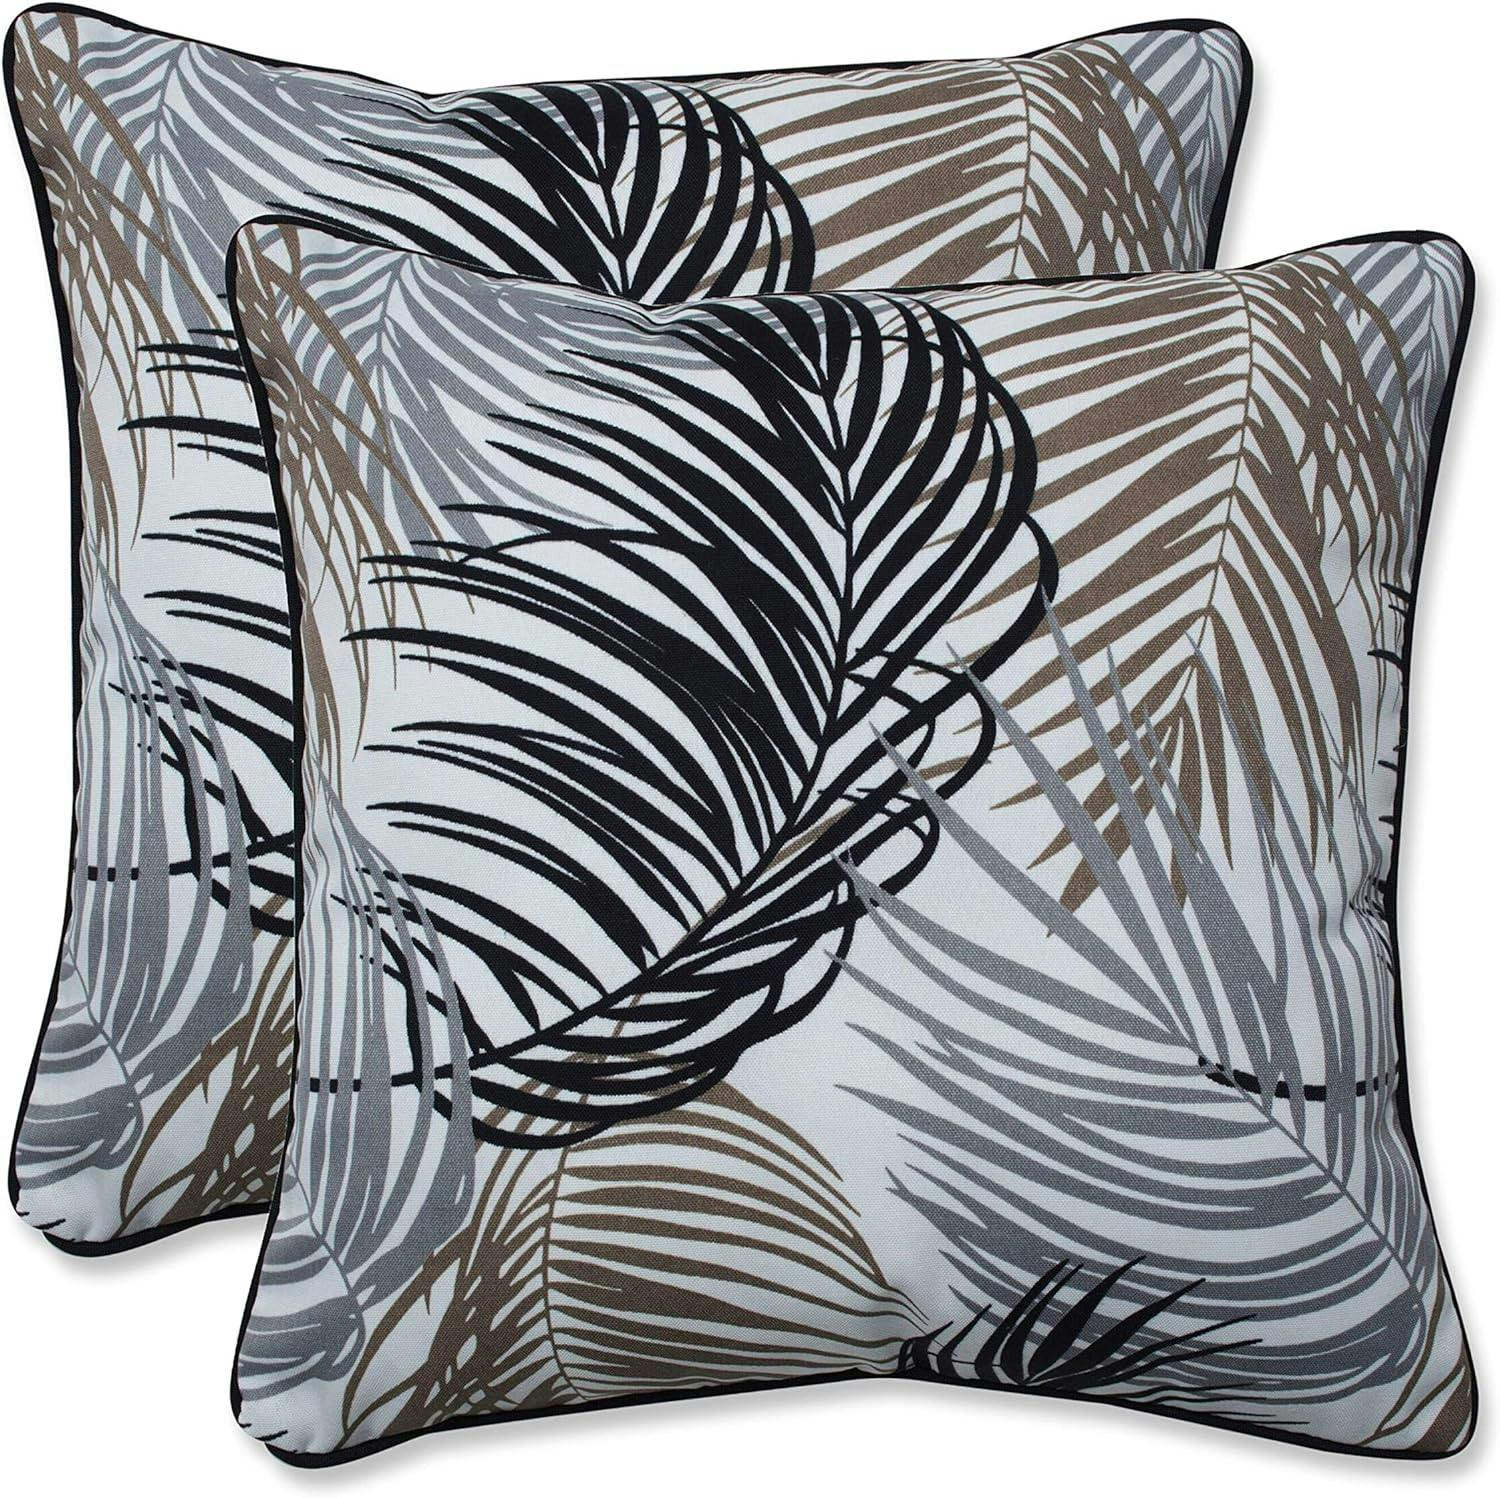 Setra Stone 16.5" Black and Neutral Palm Frond Throw Pillows, Set of 2